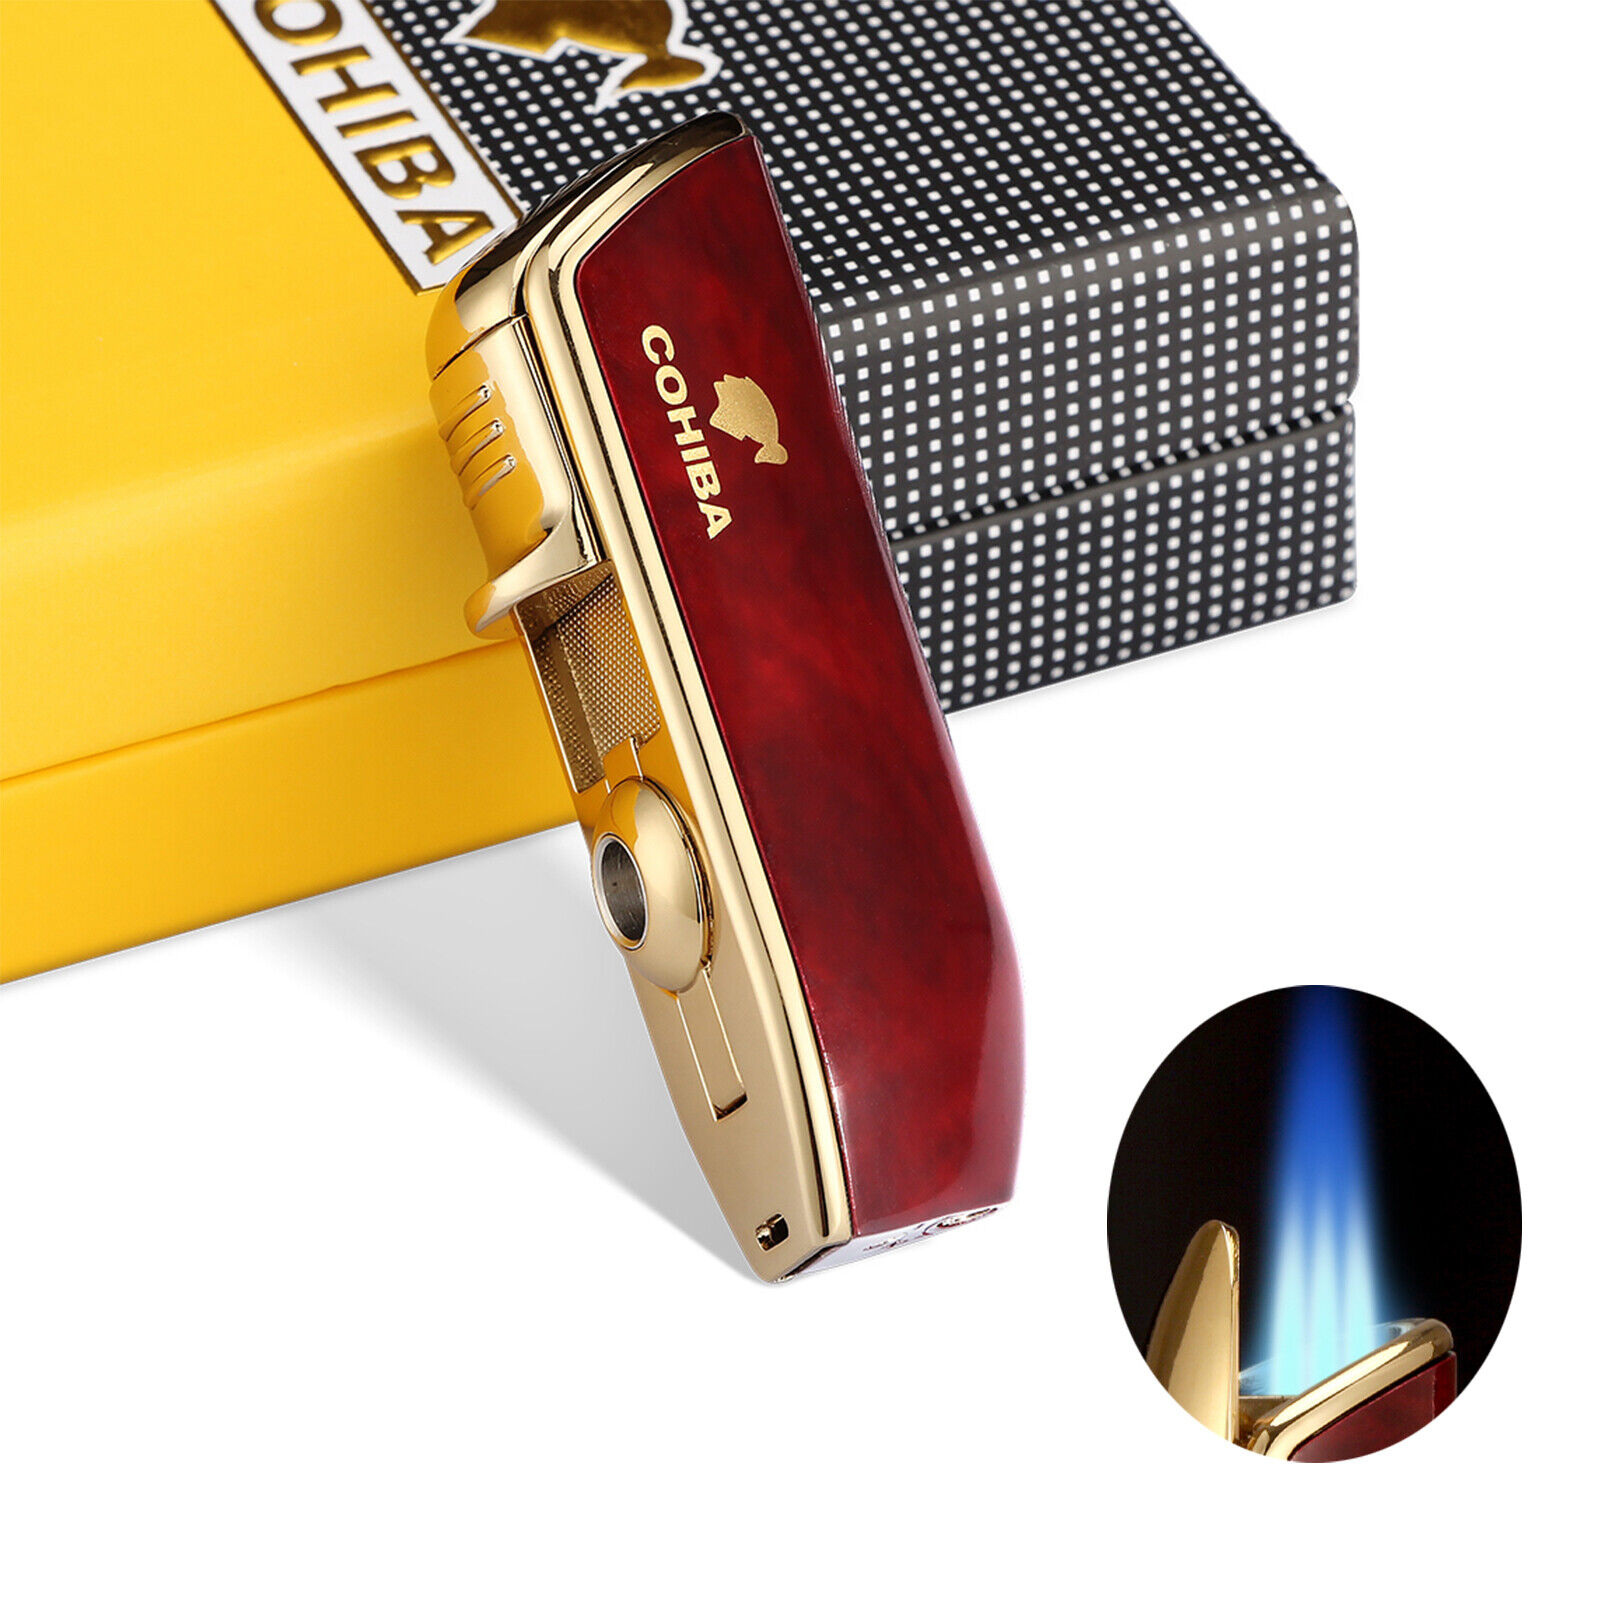 3 Jet Torch Cigar Lighter With Punch Flame Windproof Refillable Cohiba Gift Box